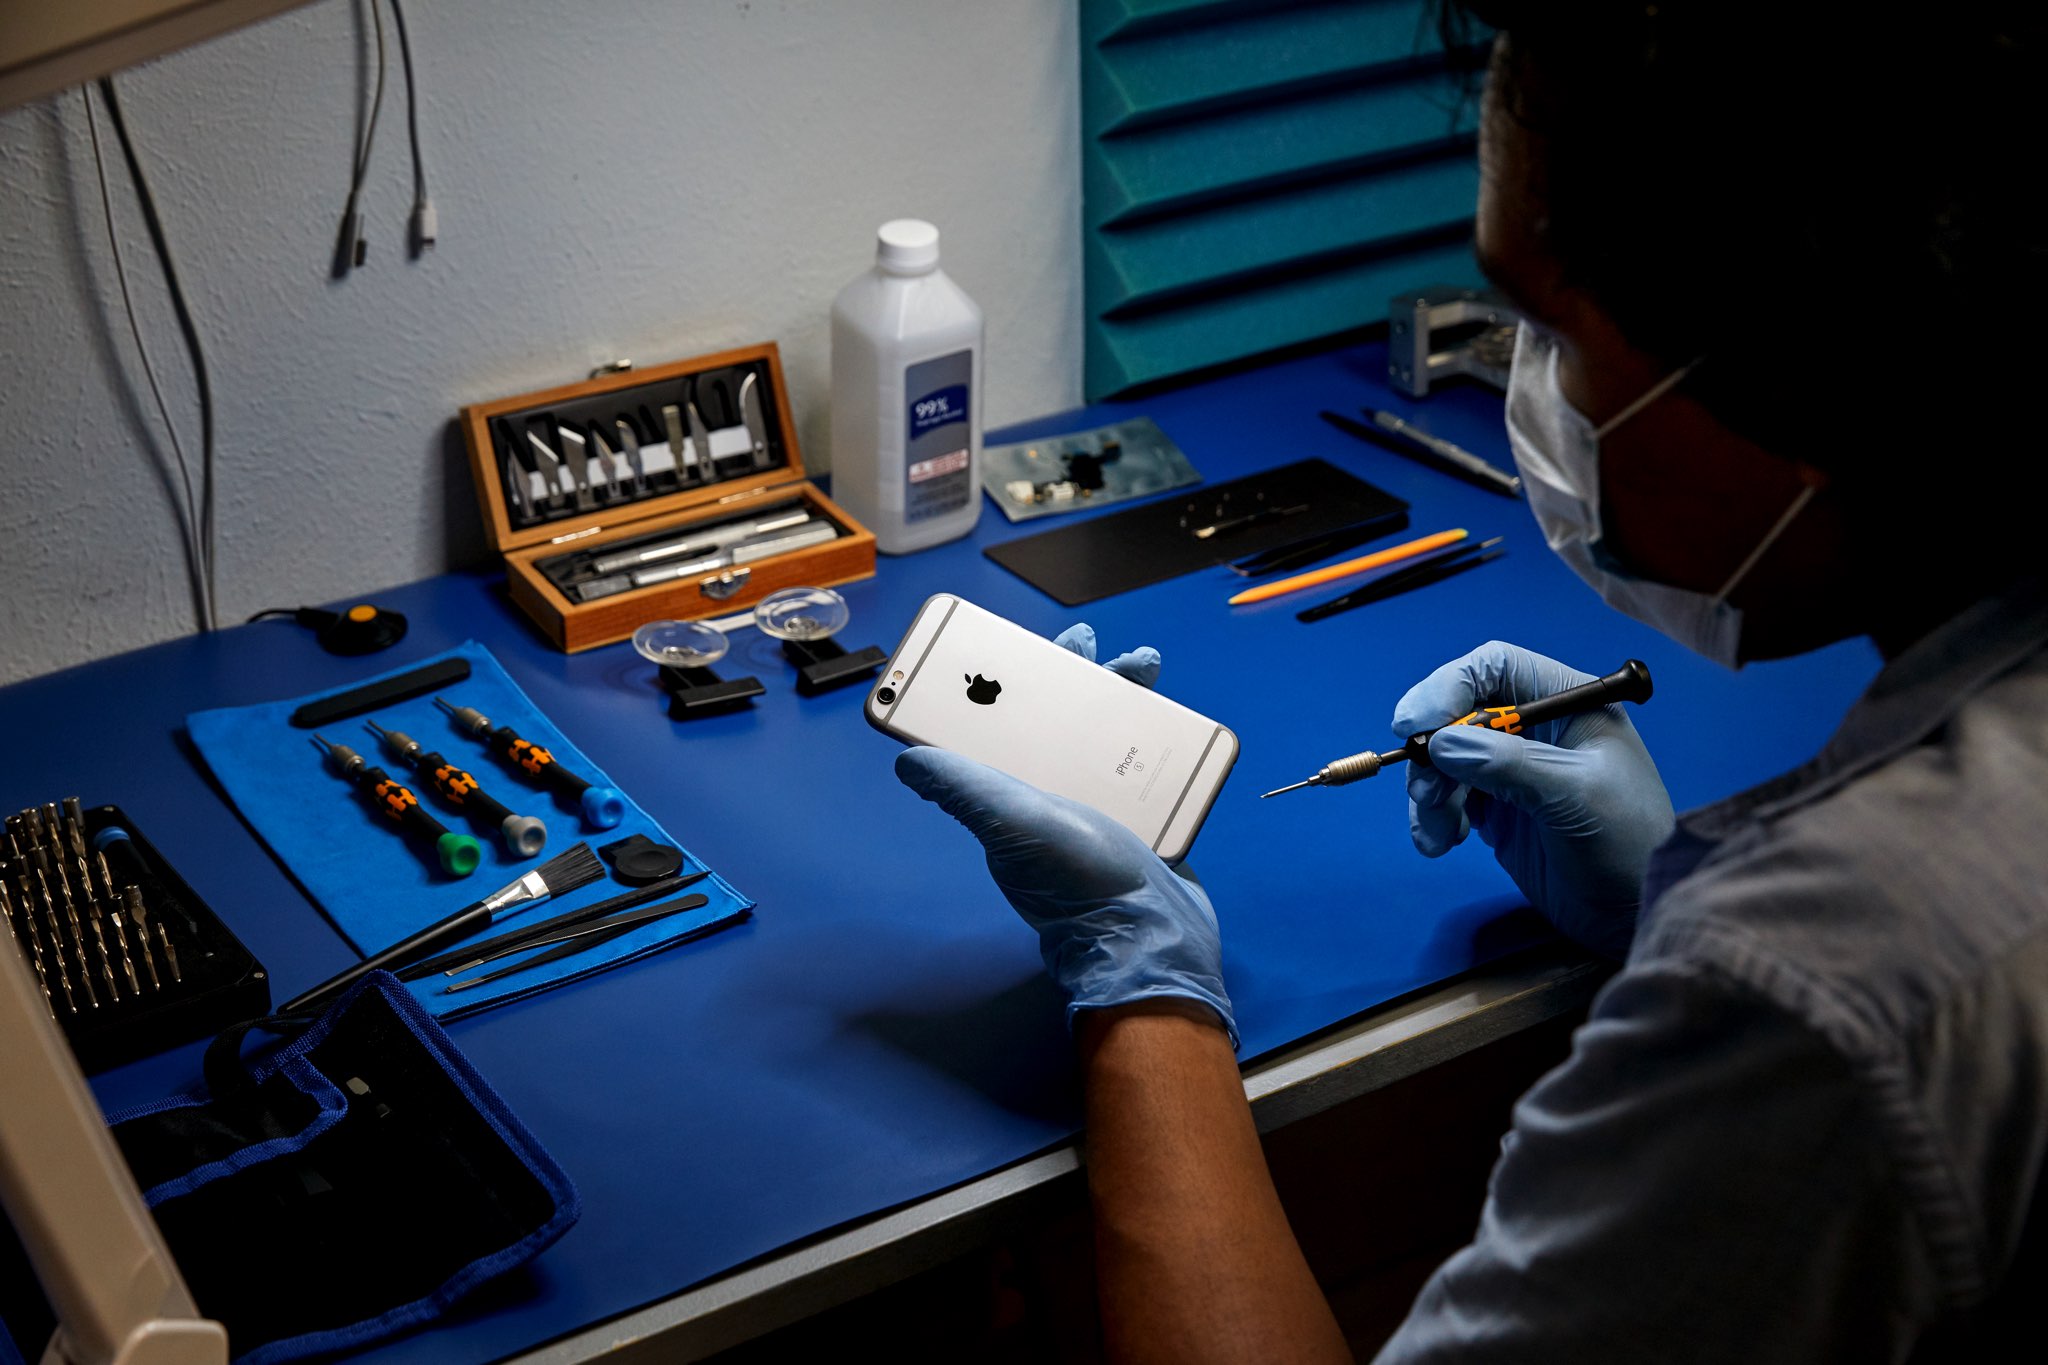 Apple expands iPhone repair program to European countries and United Kingdom